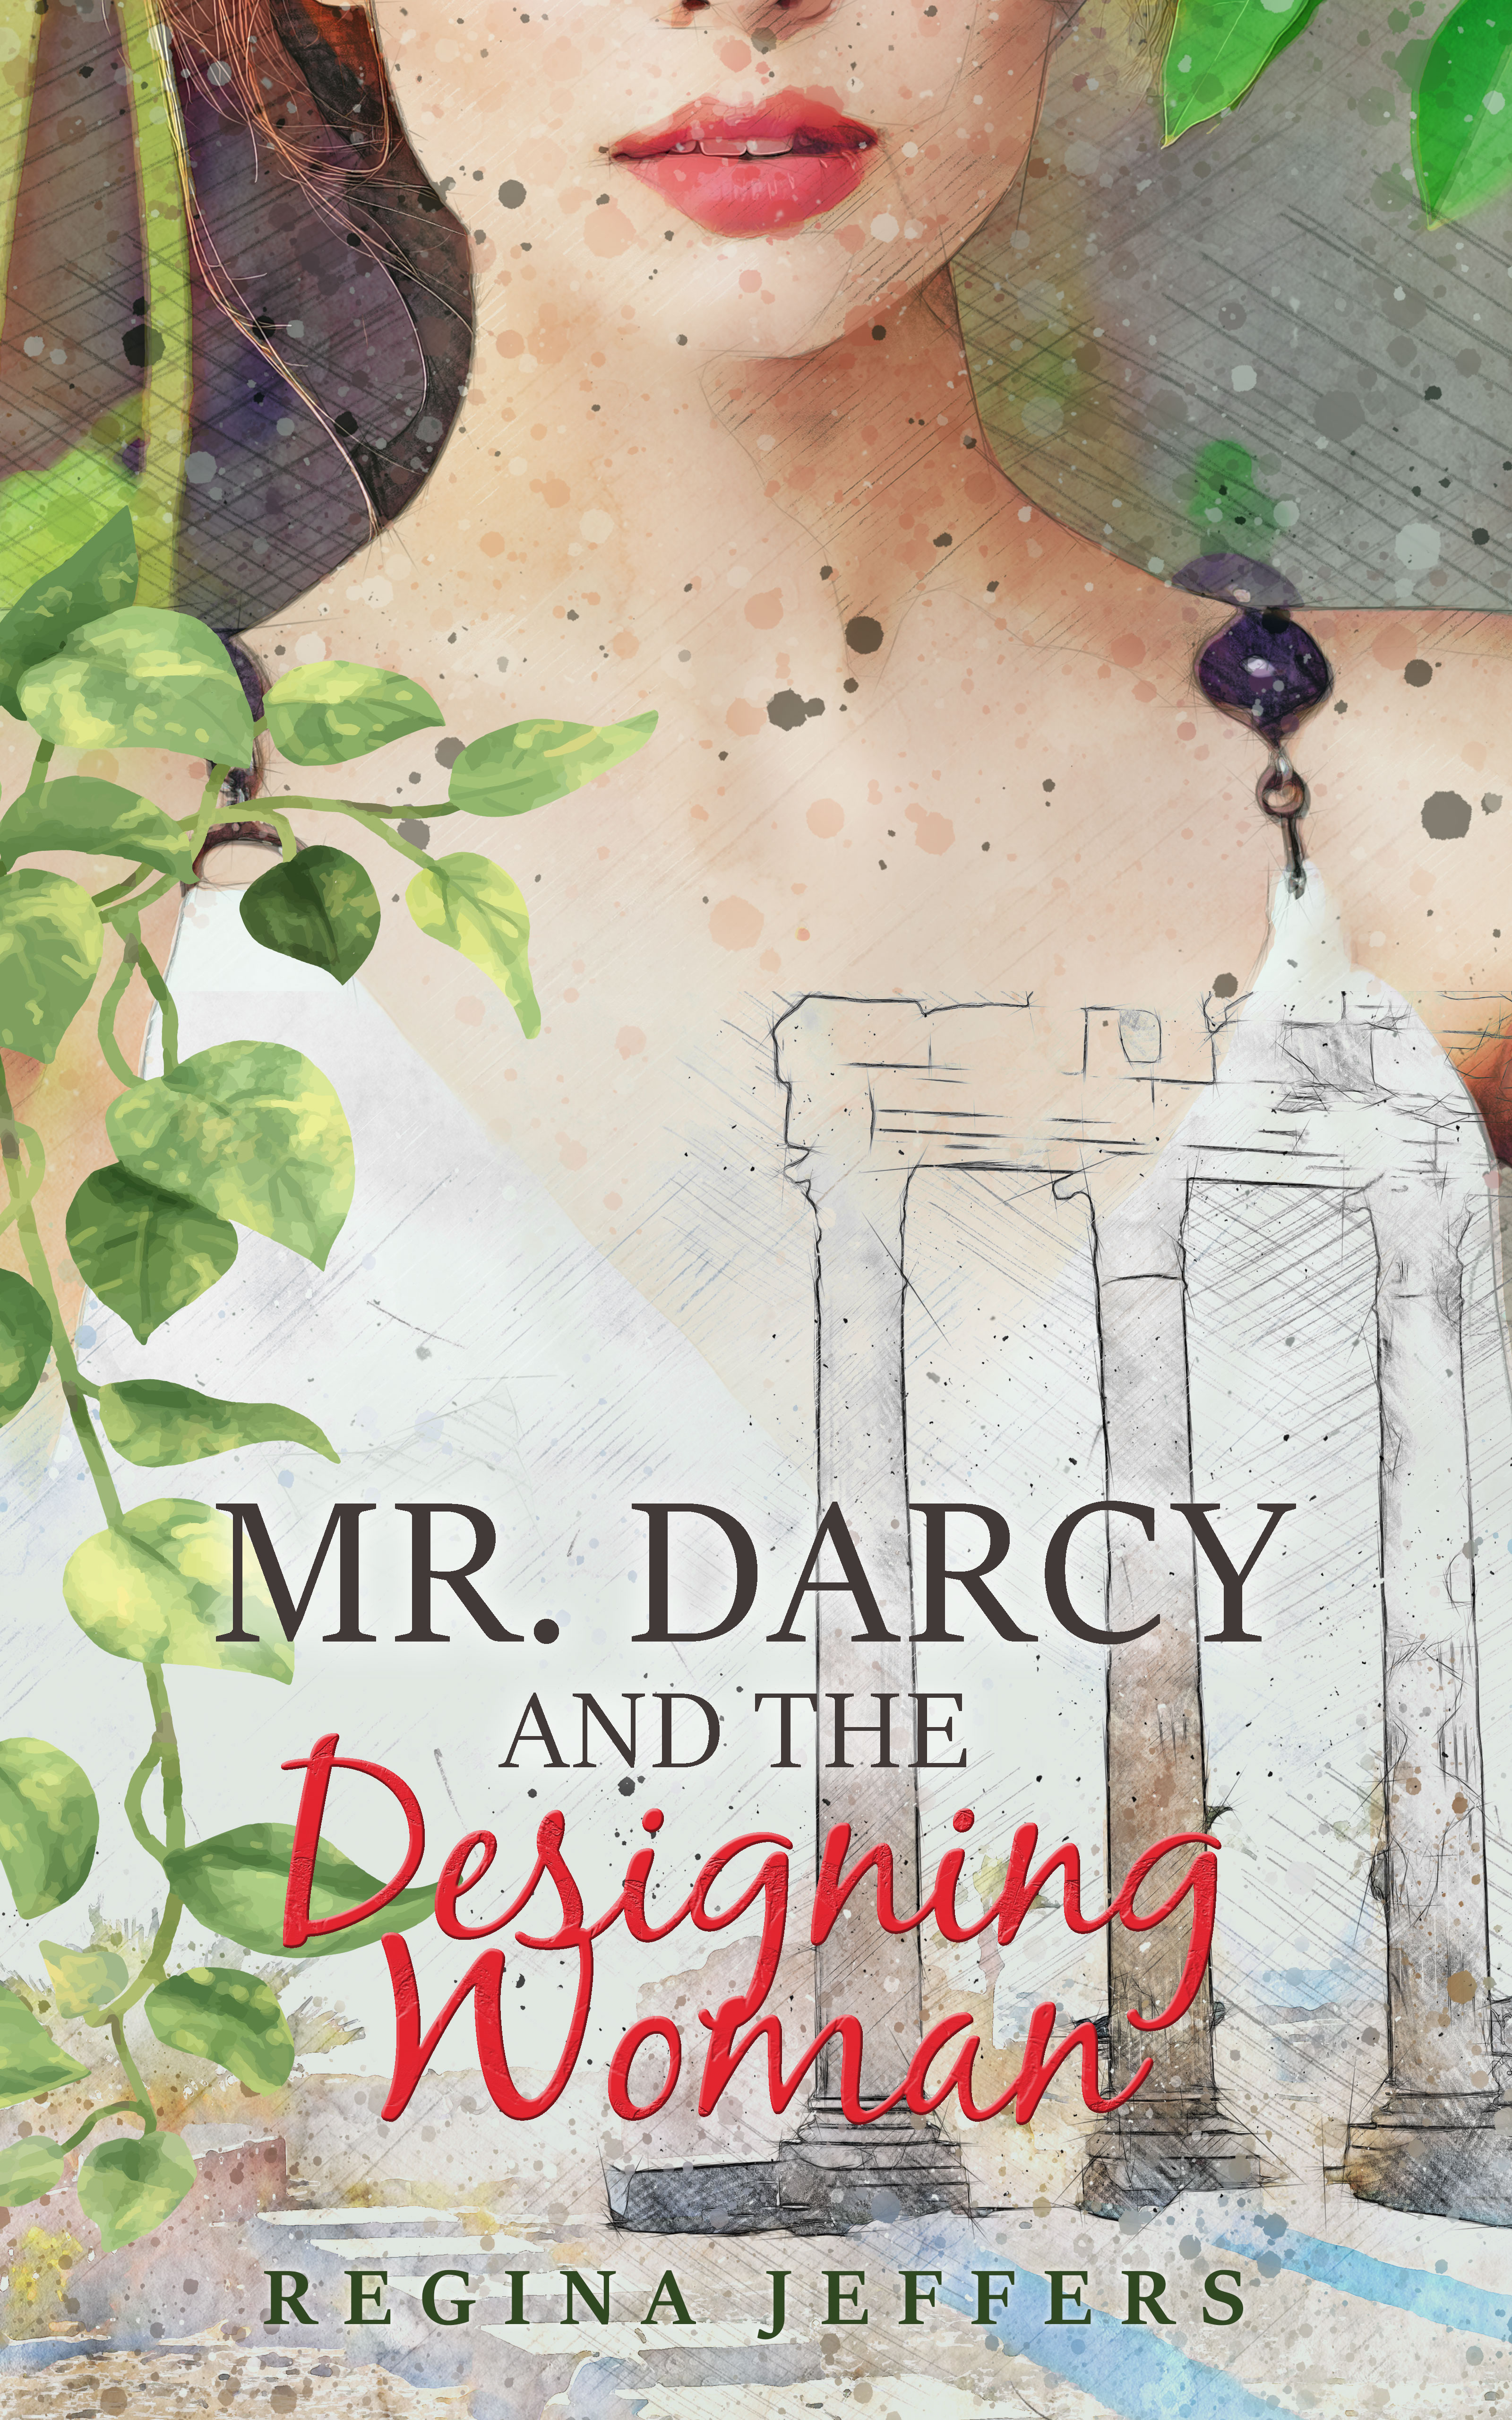 Building a Better Pemberley for “Mr. Darcy and the Designing Woman” – Celebrate the Book’s Release with a Giveaway